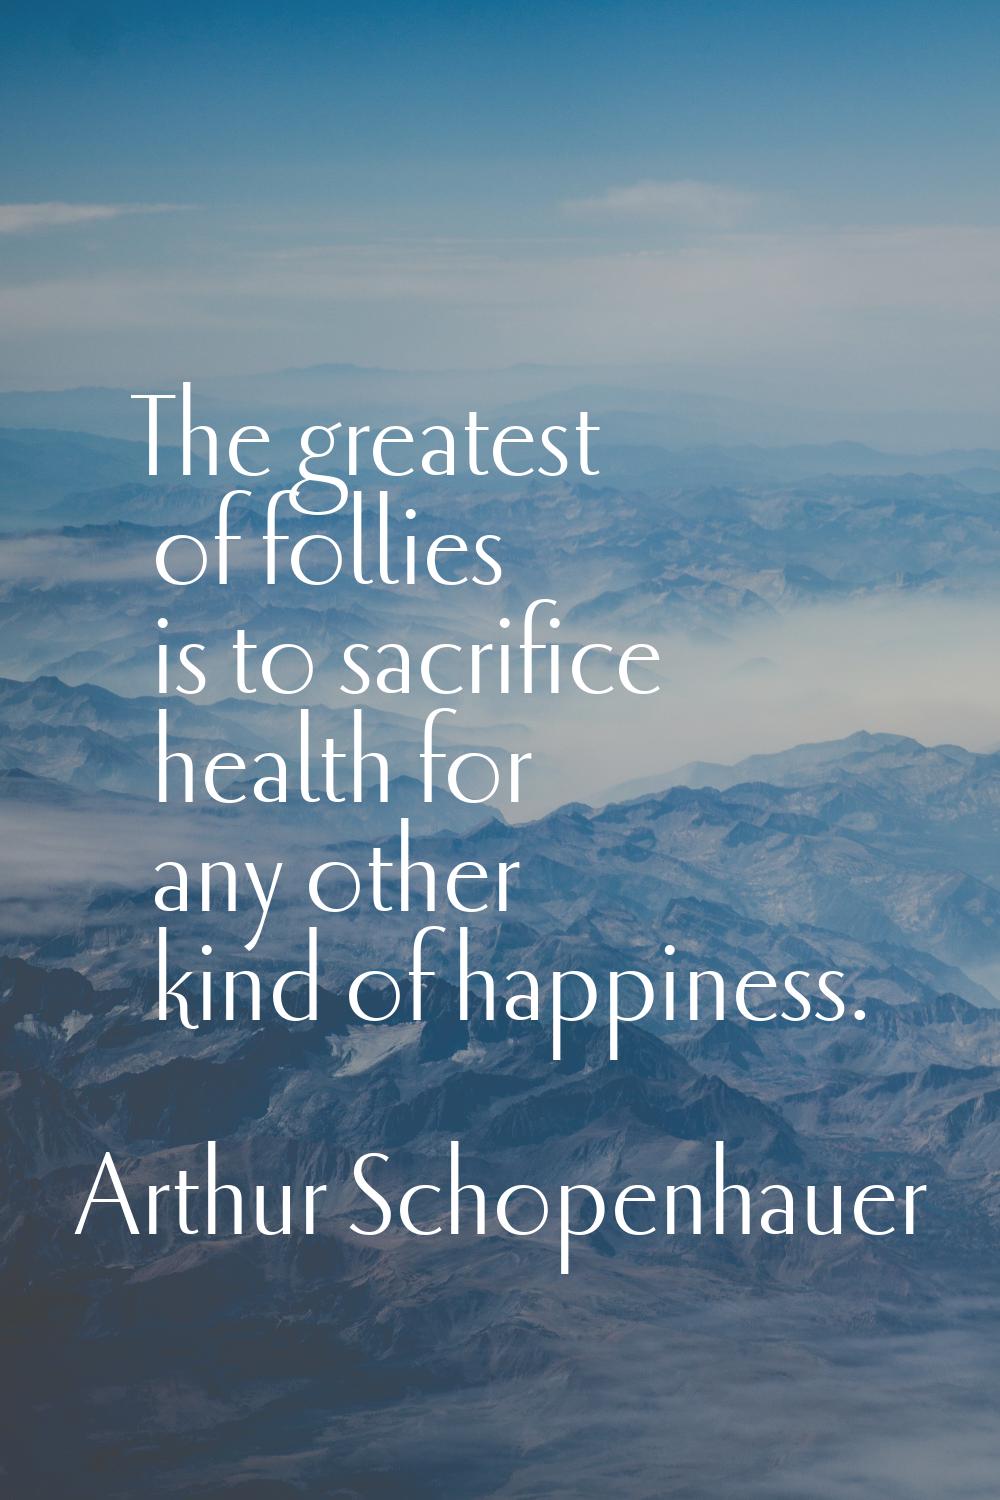 The greatest of follies is to sacrifice health for any other kind of happiness.